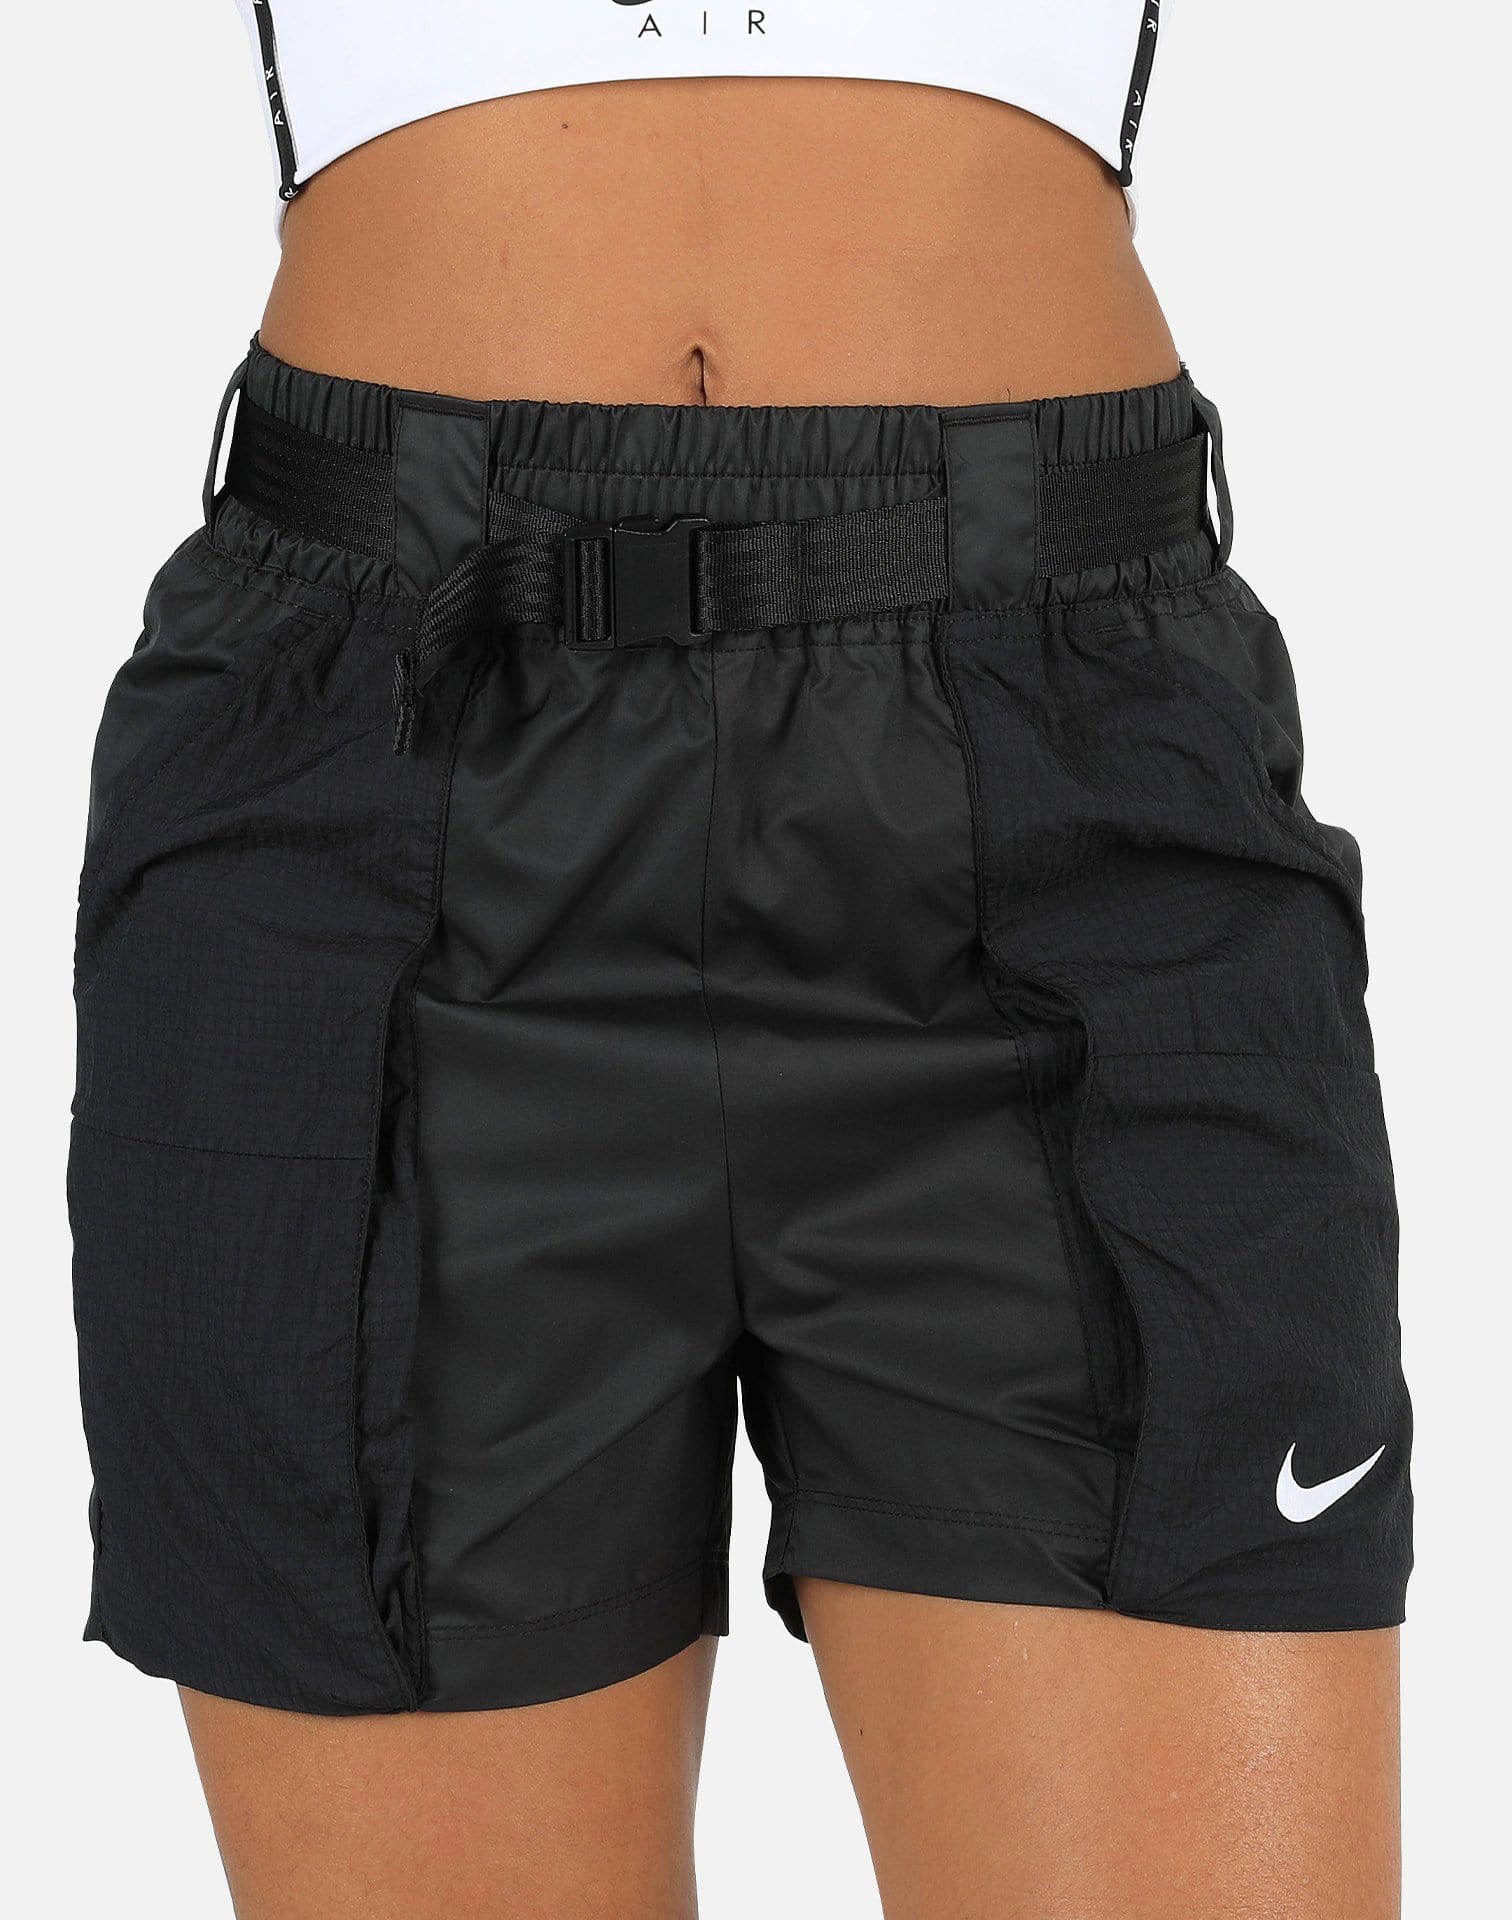 NSW SWOOSH WOVEN SHORTS – DTLR